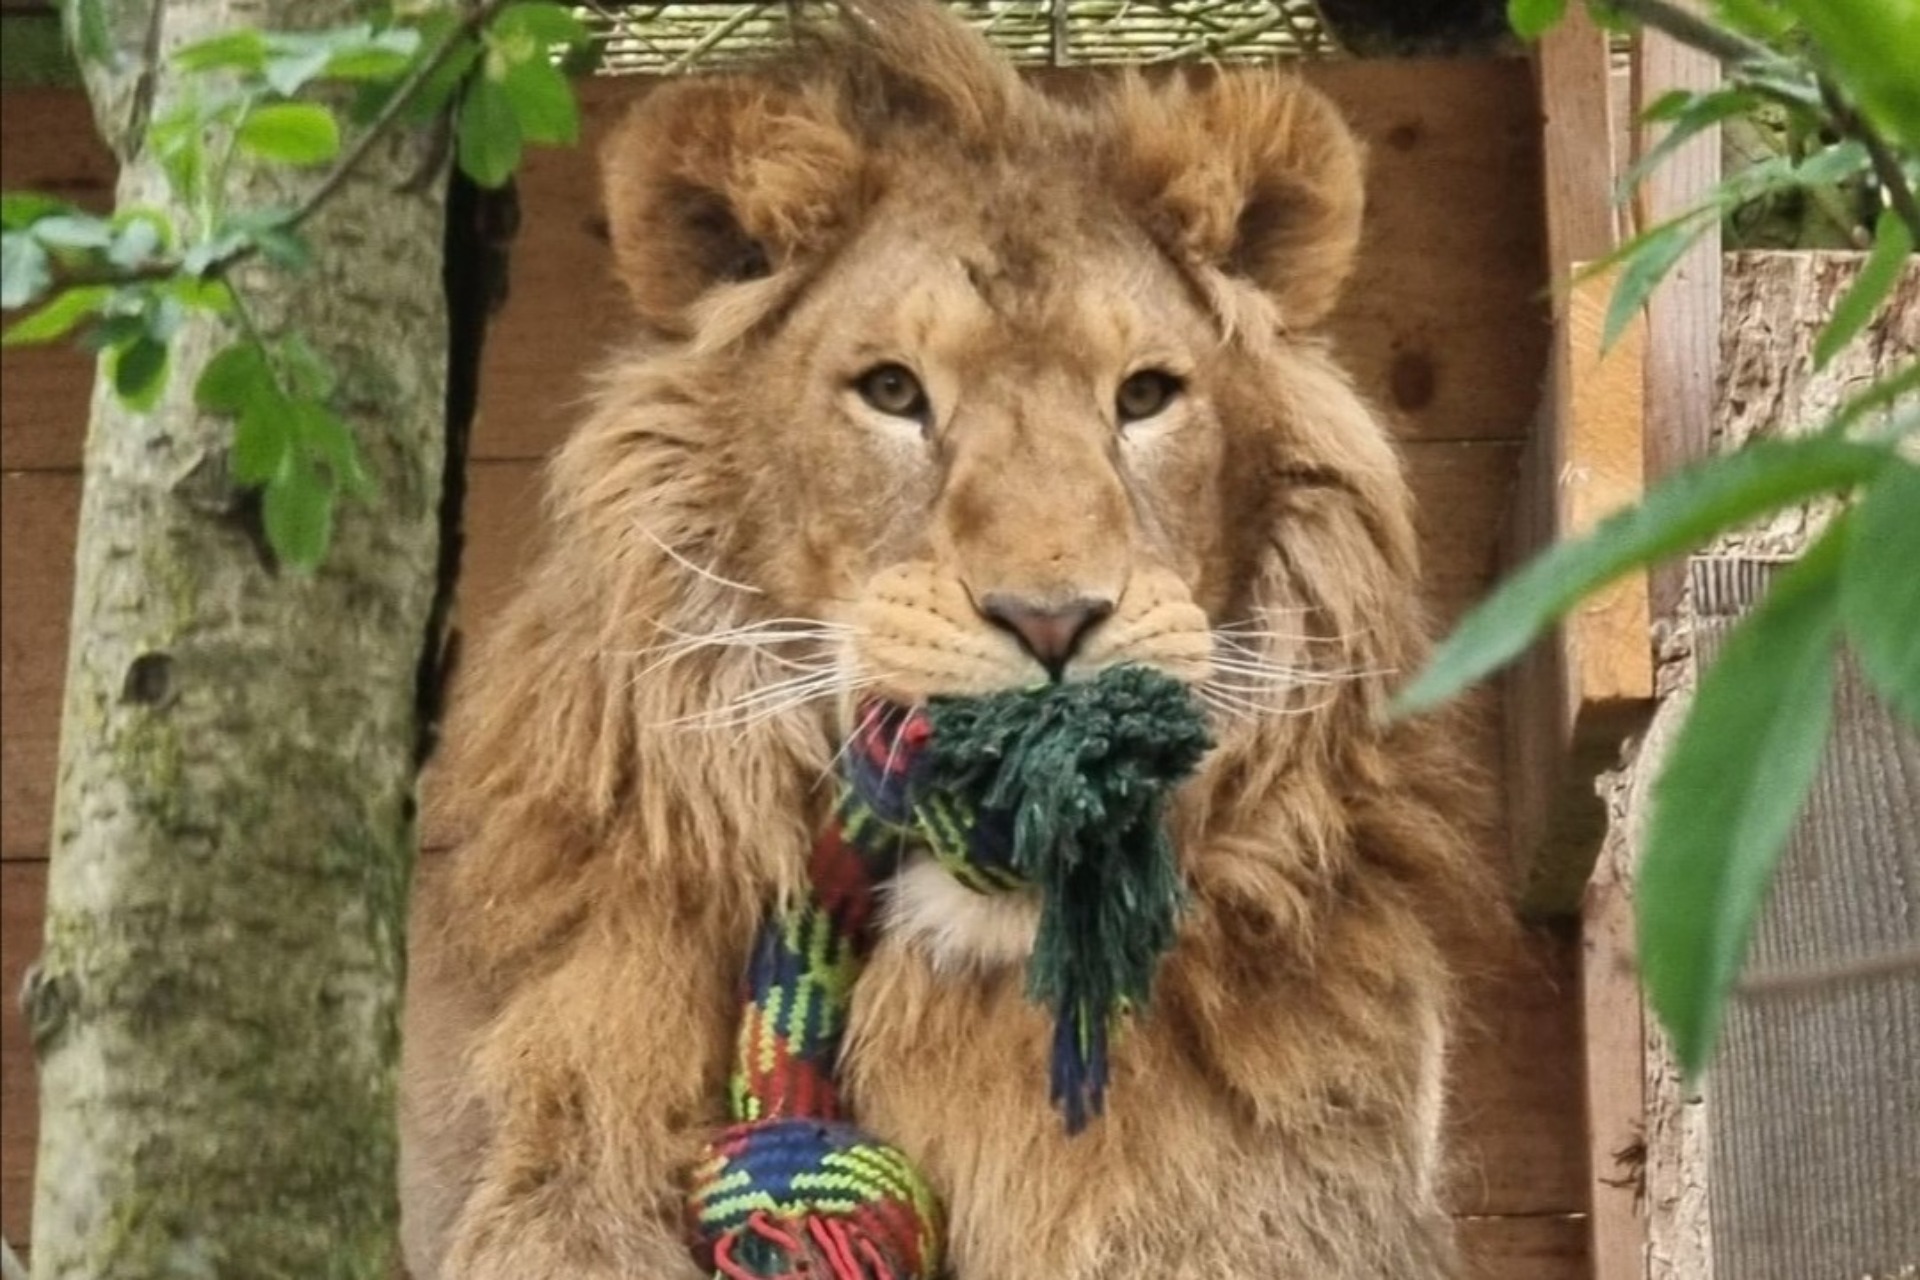 A lion holding a rope in its mouth